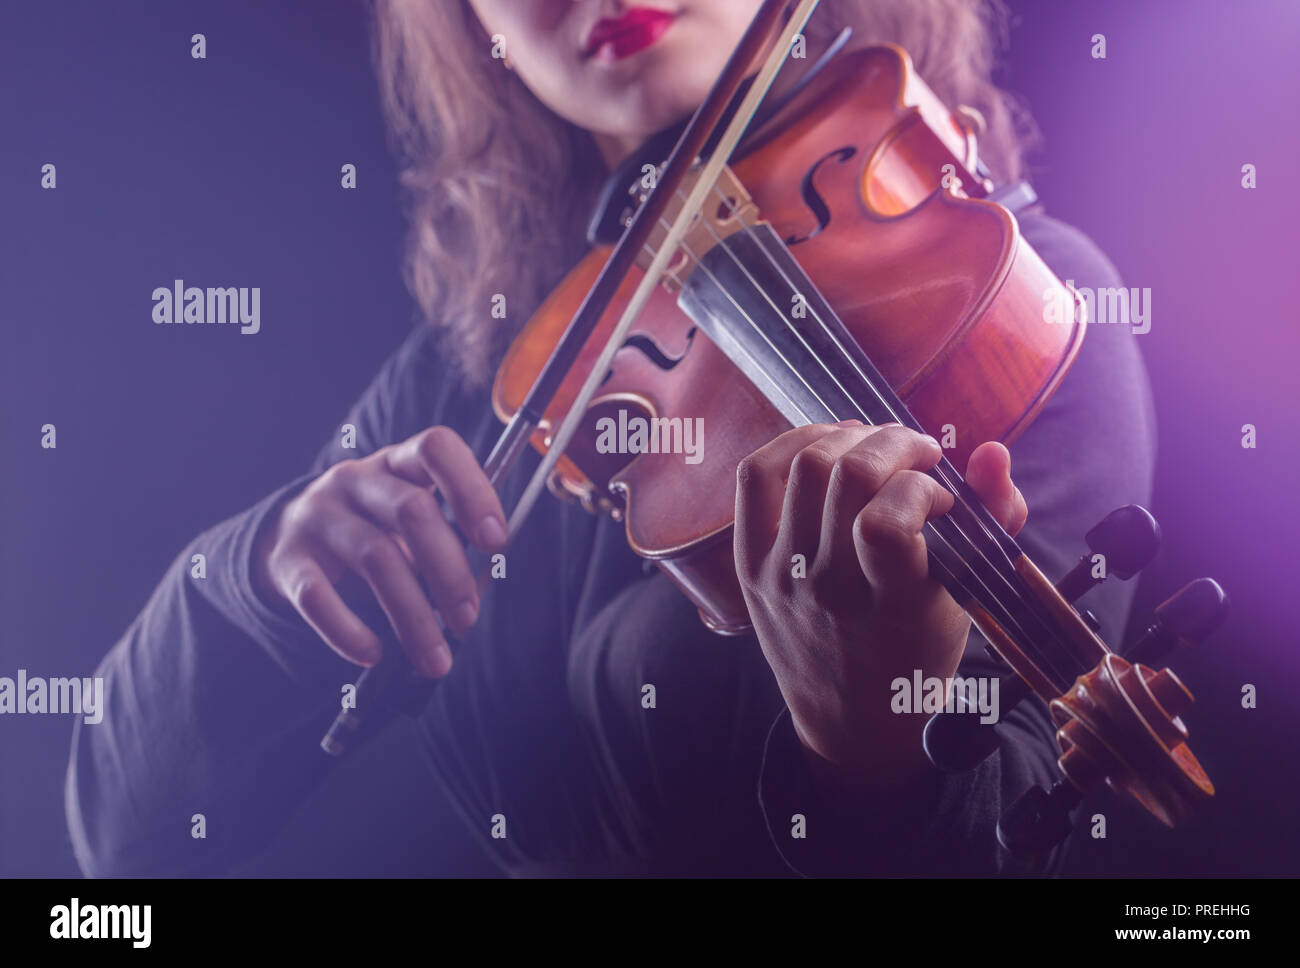 Close-up of a woman playing the violin on dark background Stock Photo